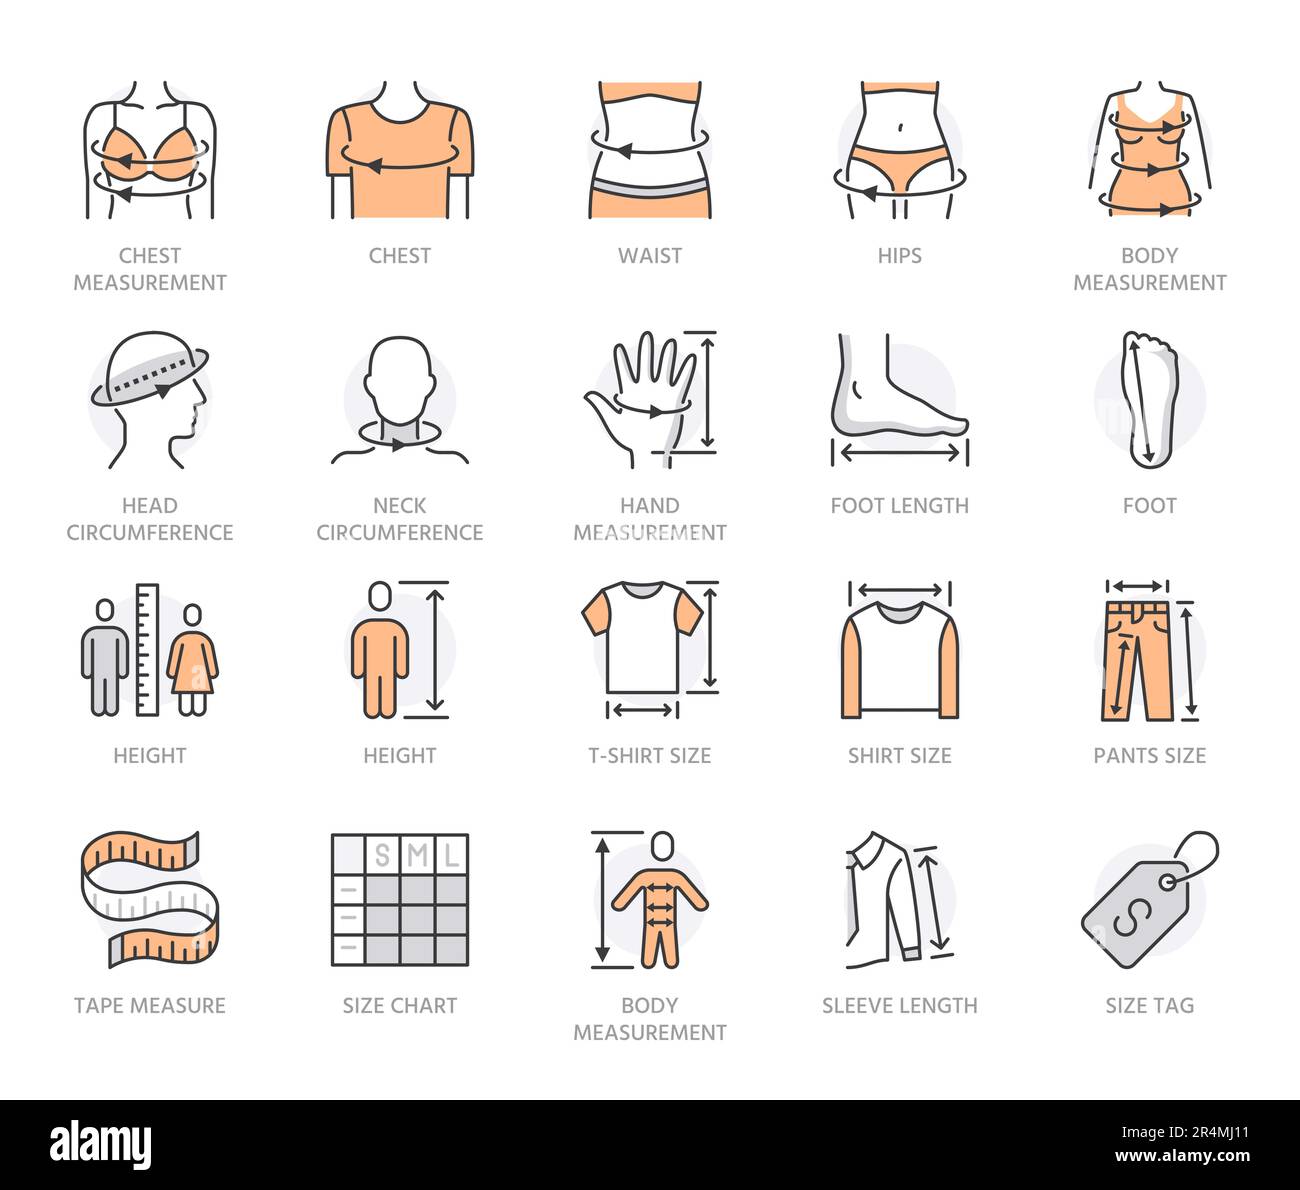 Clothing Size Chart Stock Illustrations – 573 Clothing Size Chart Stock  Illustrations, Vectors & Clipart - Dreamstime